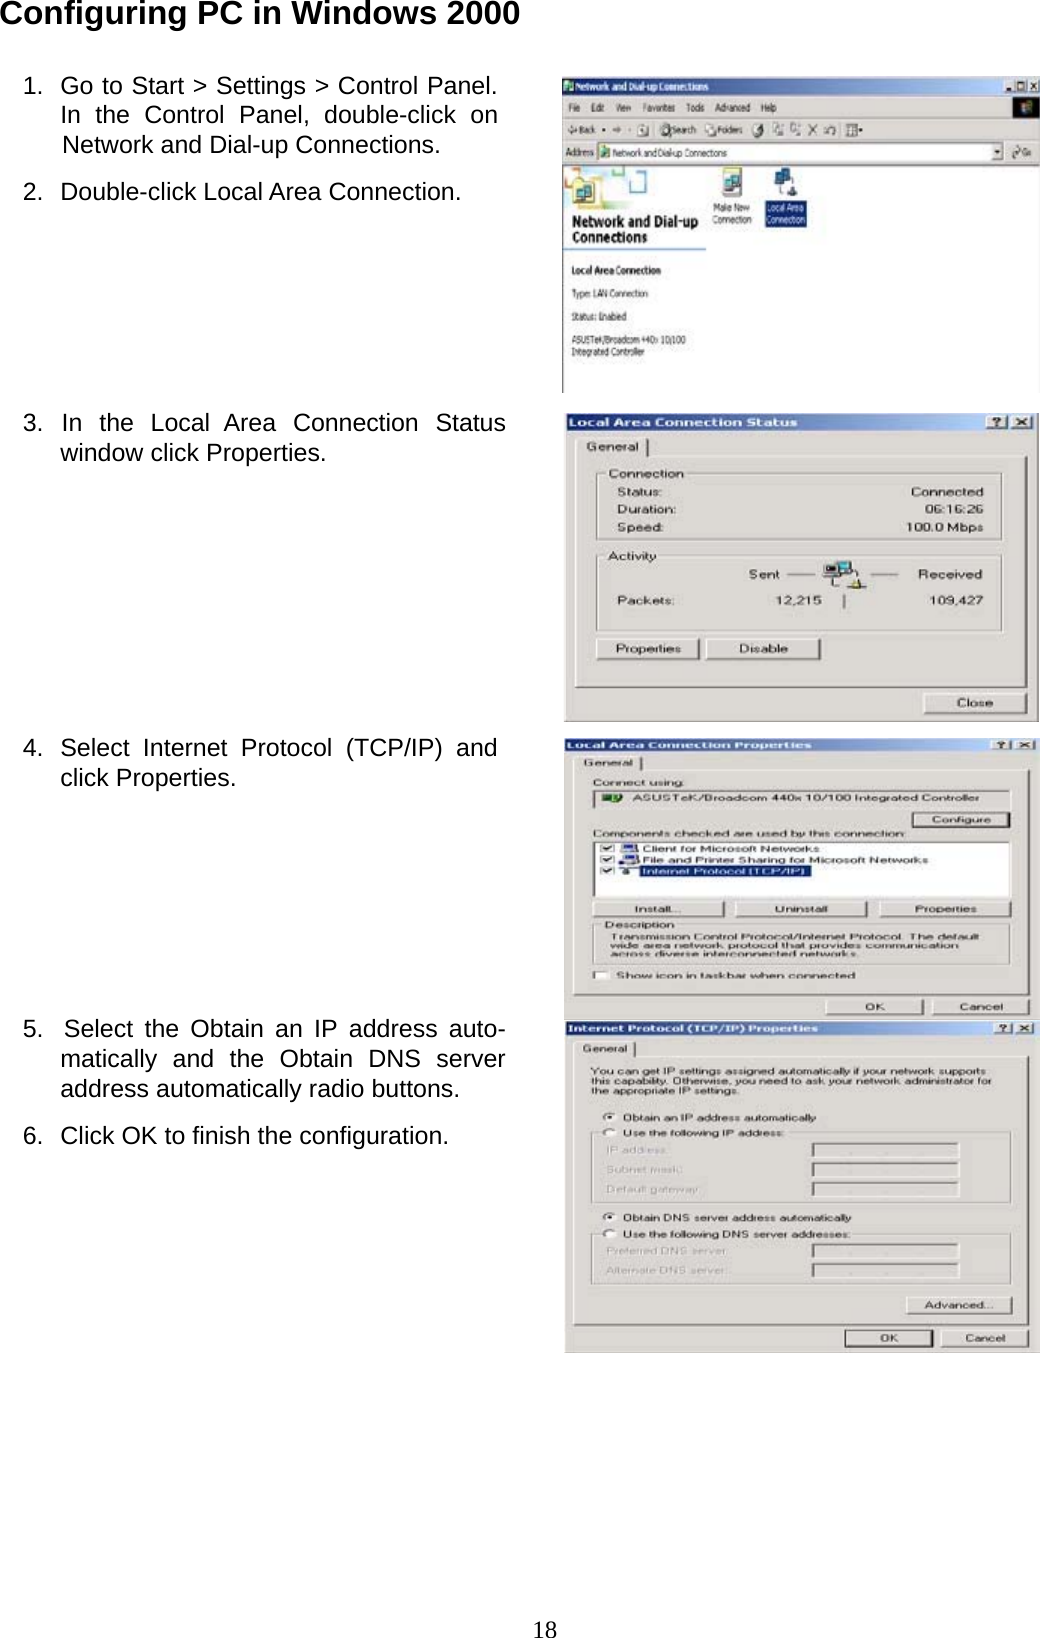 18 Configuring PC in Windows 2000   1.  Go to Start &gt; Settings &gt; Control Panel. In  the  Control  Panel,  double-click  on Network and Dial-up Connections.  2.  Double-click Local Area Connection.           3.  In  the  Local  Area  Connection  Status window click Properties.              4.  Select Internet Protocol (TCP/IP) and click Properties.            5.  Select the Obtain an IP address auto- matically and the Obtain DNS server address automatically radio buttons.  6.  Click OK to finish the configuration. 